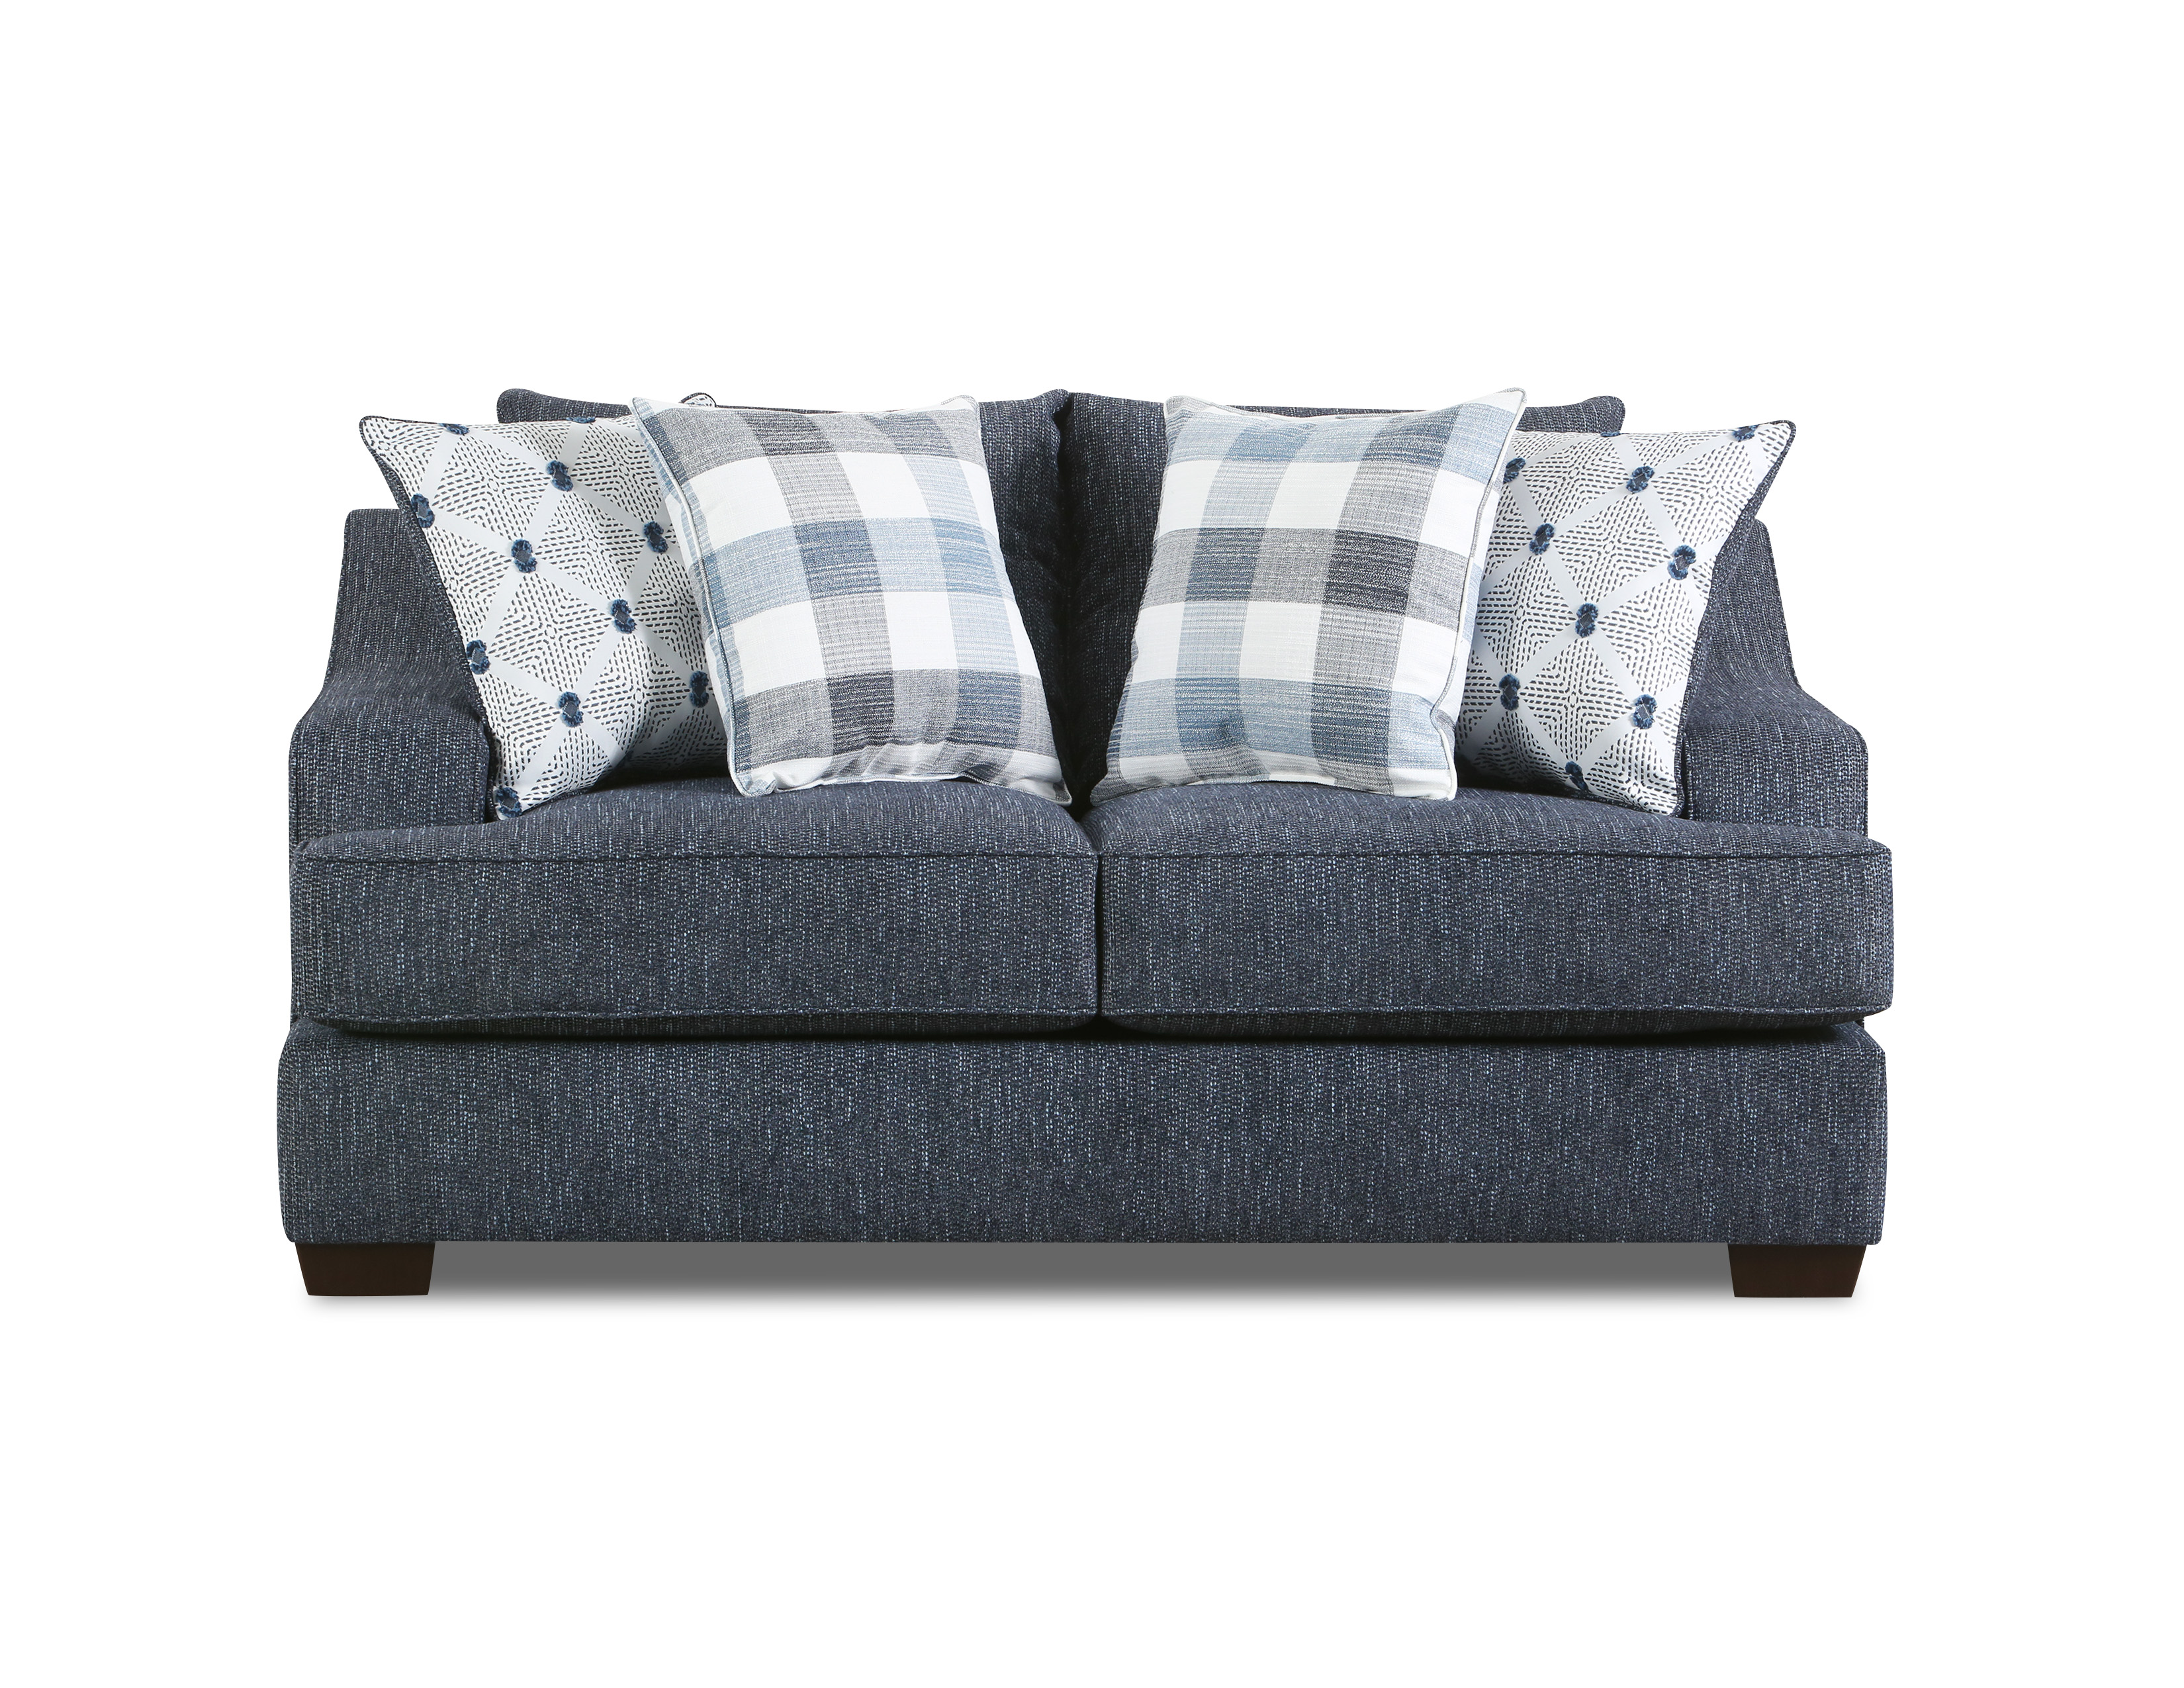 Indigo Loveseat with Pocketed Coil Cushions